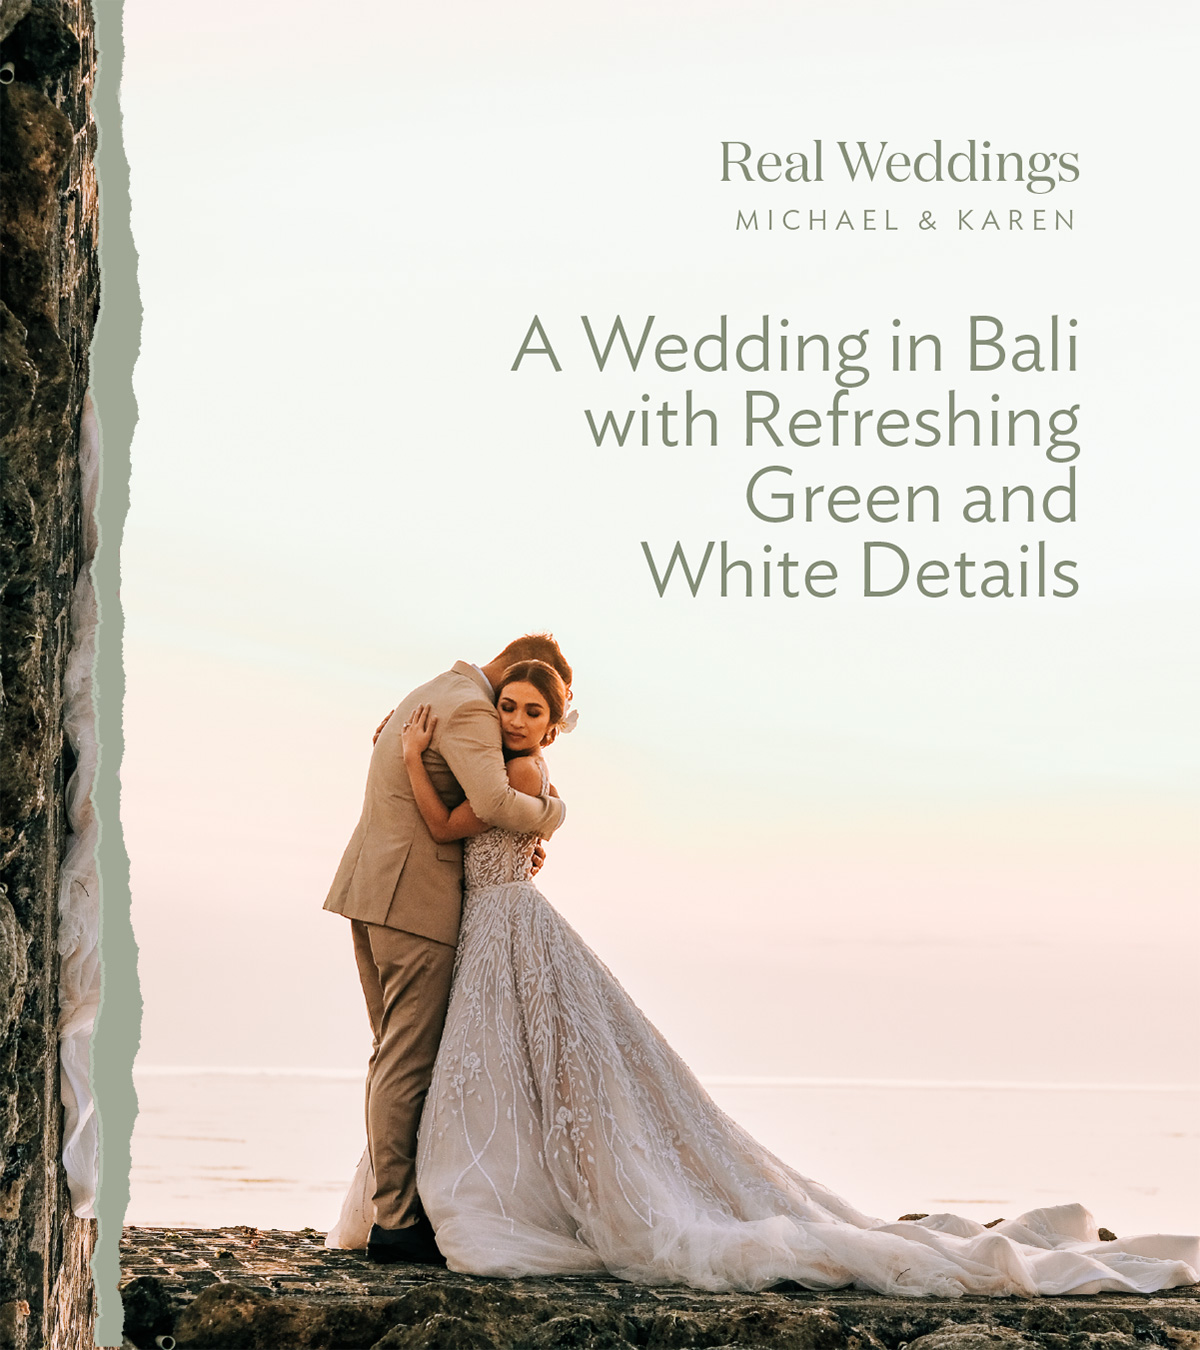 A Wedding in Bali with Refreshing Green and White Details